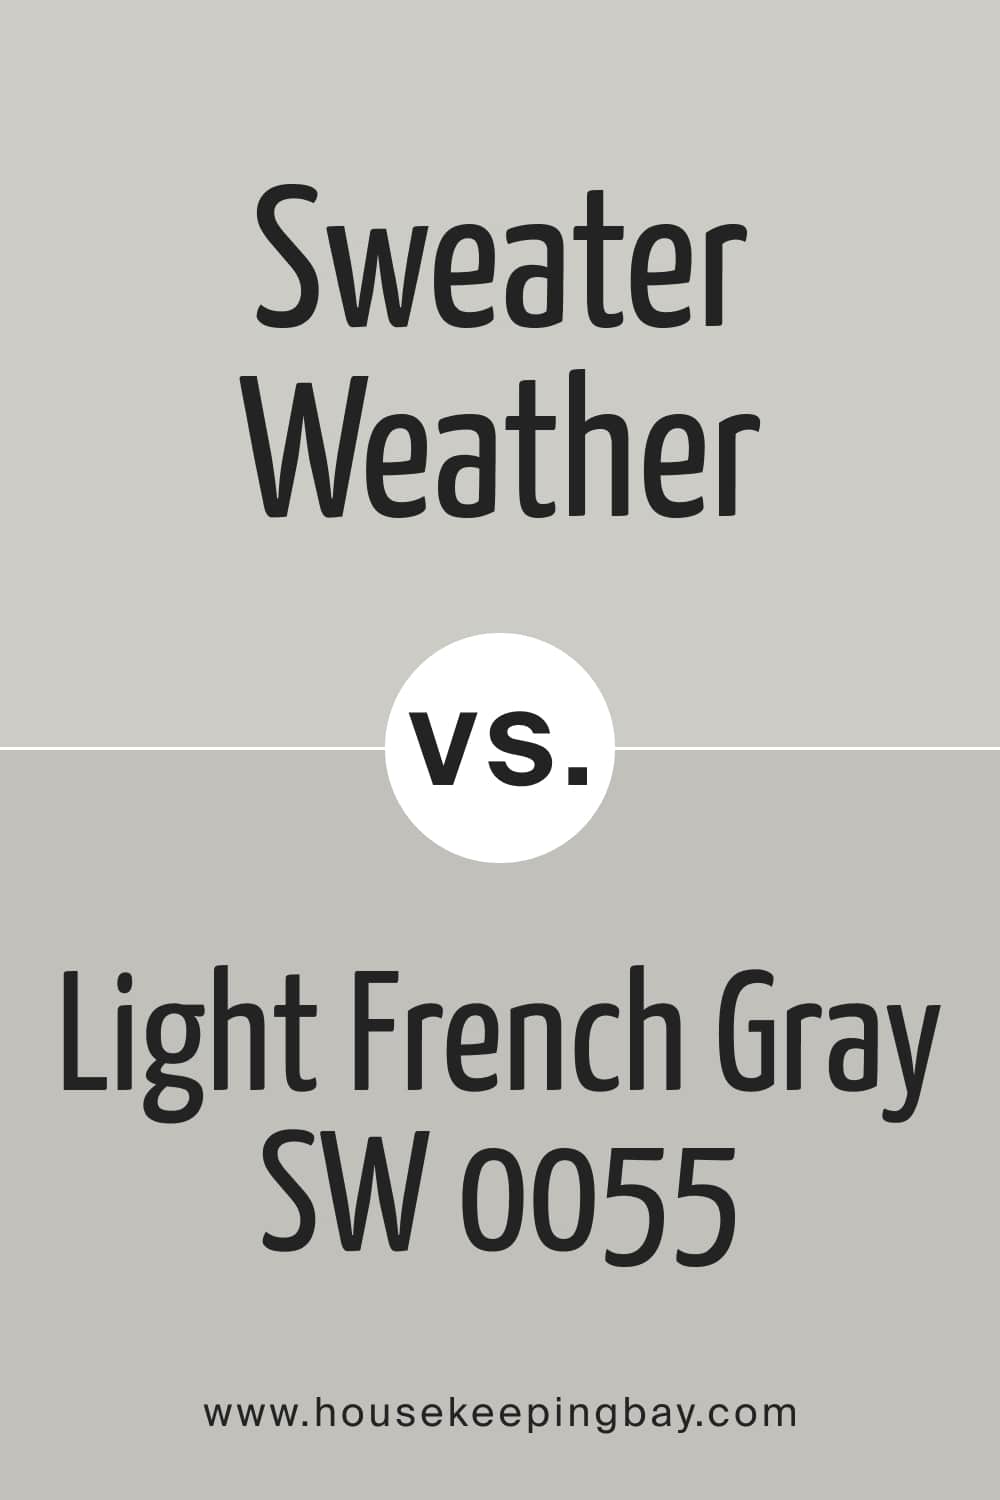 Sweater Weather SW 9548 vs Light French Gray SW 0055